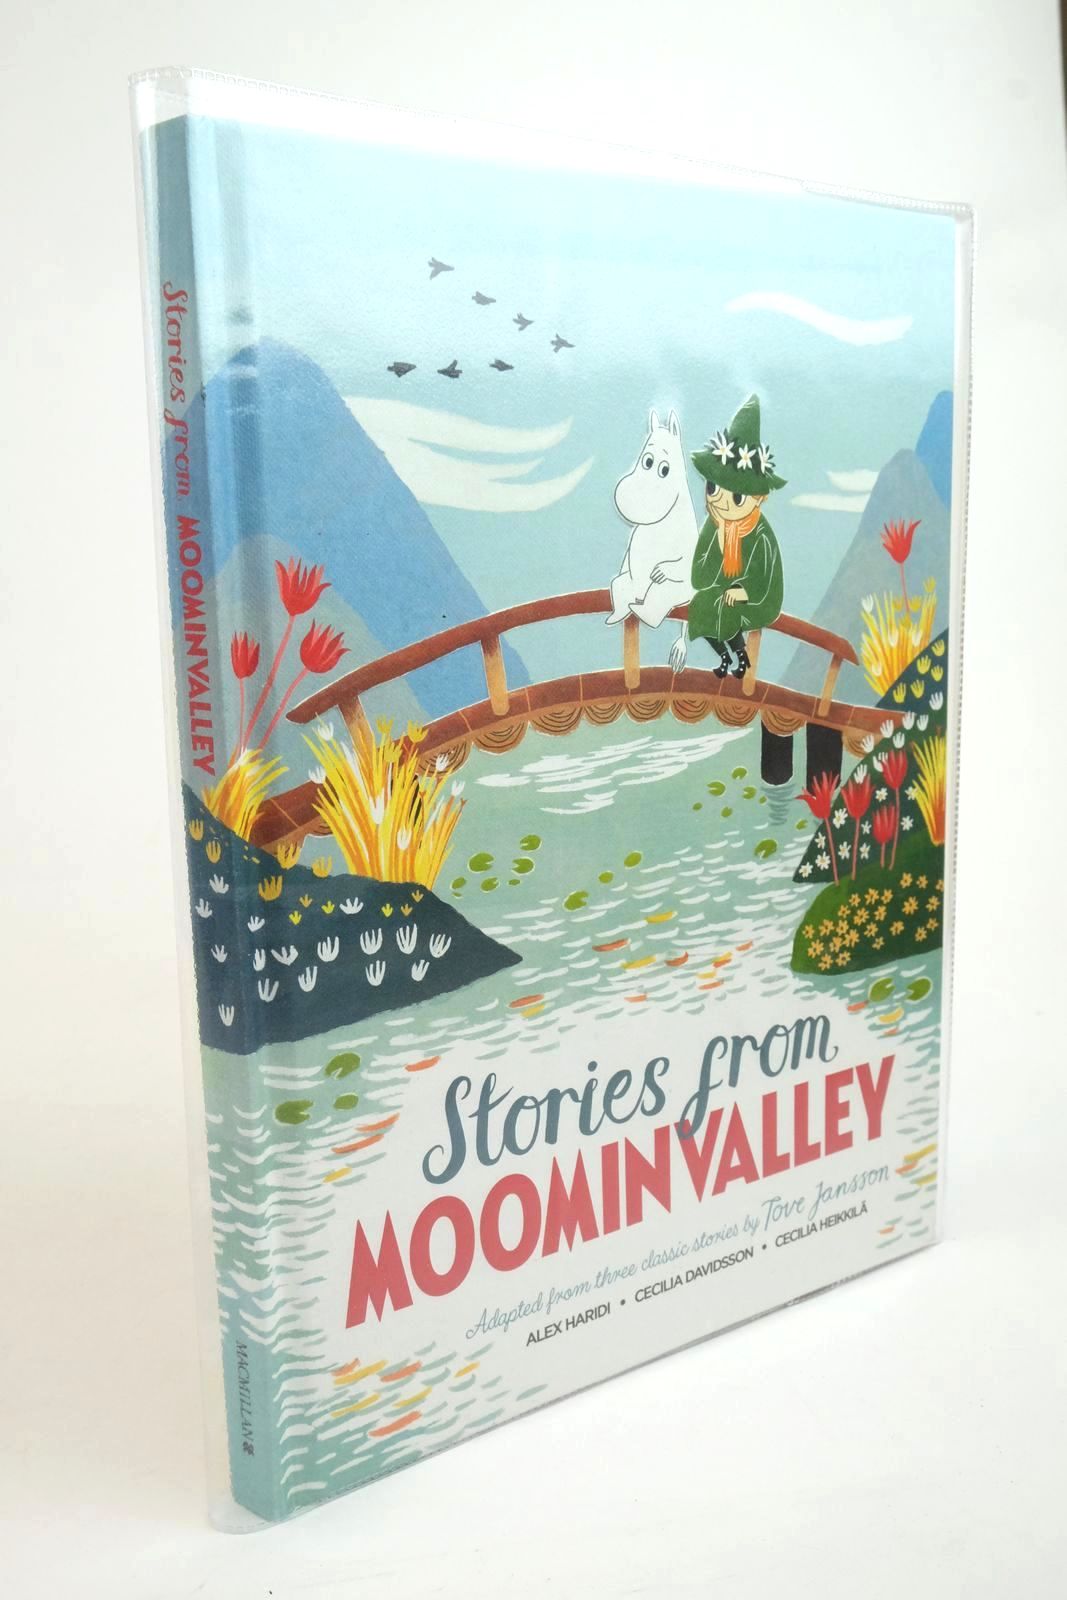 Photo of STORIES FROM MOOMINVALLEY written by Jansson, Tove Haridi, Alex Davidsson, Cecilia illustrated by Heikkila, Cecilia published by Macmillan Children's Books (STOCK CODE: 1322365)  for sale by Stella & Rose's Books